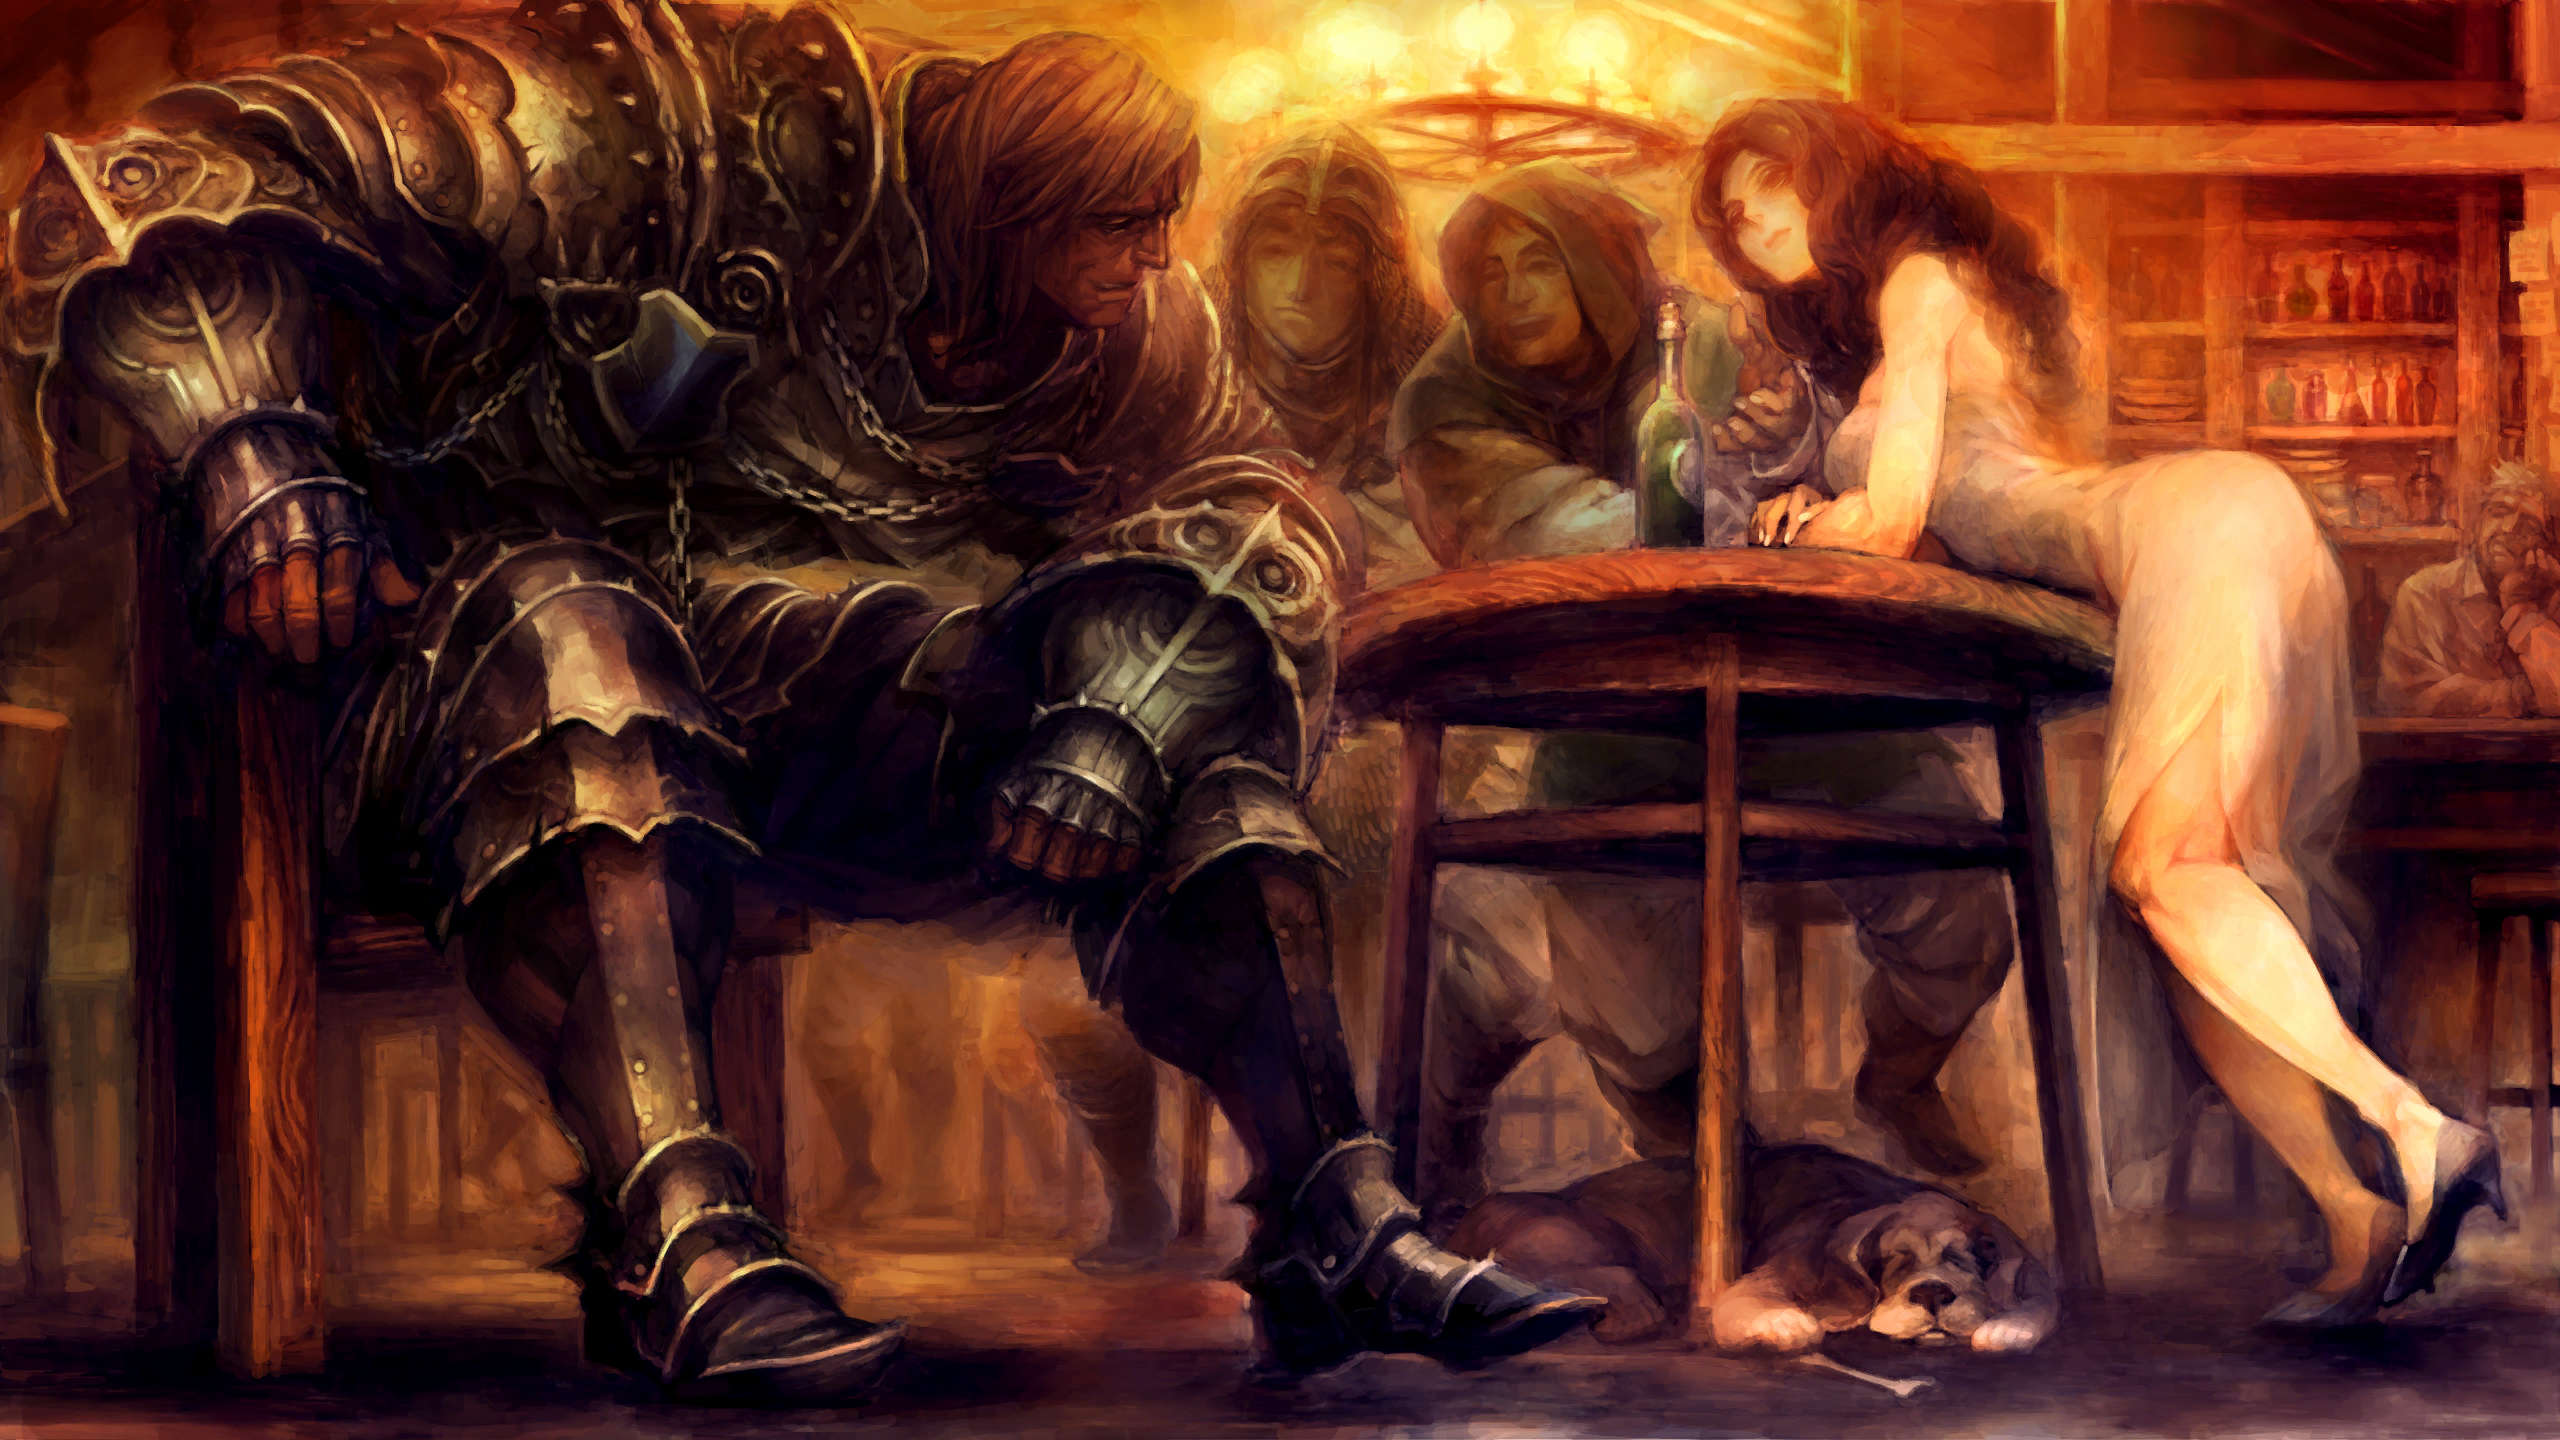 General 2560x1440 Dragon's Crown fantasy art knight fictional character video games video game characters